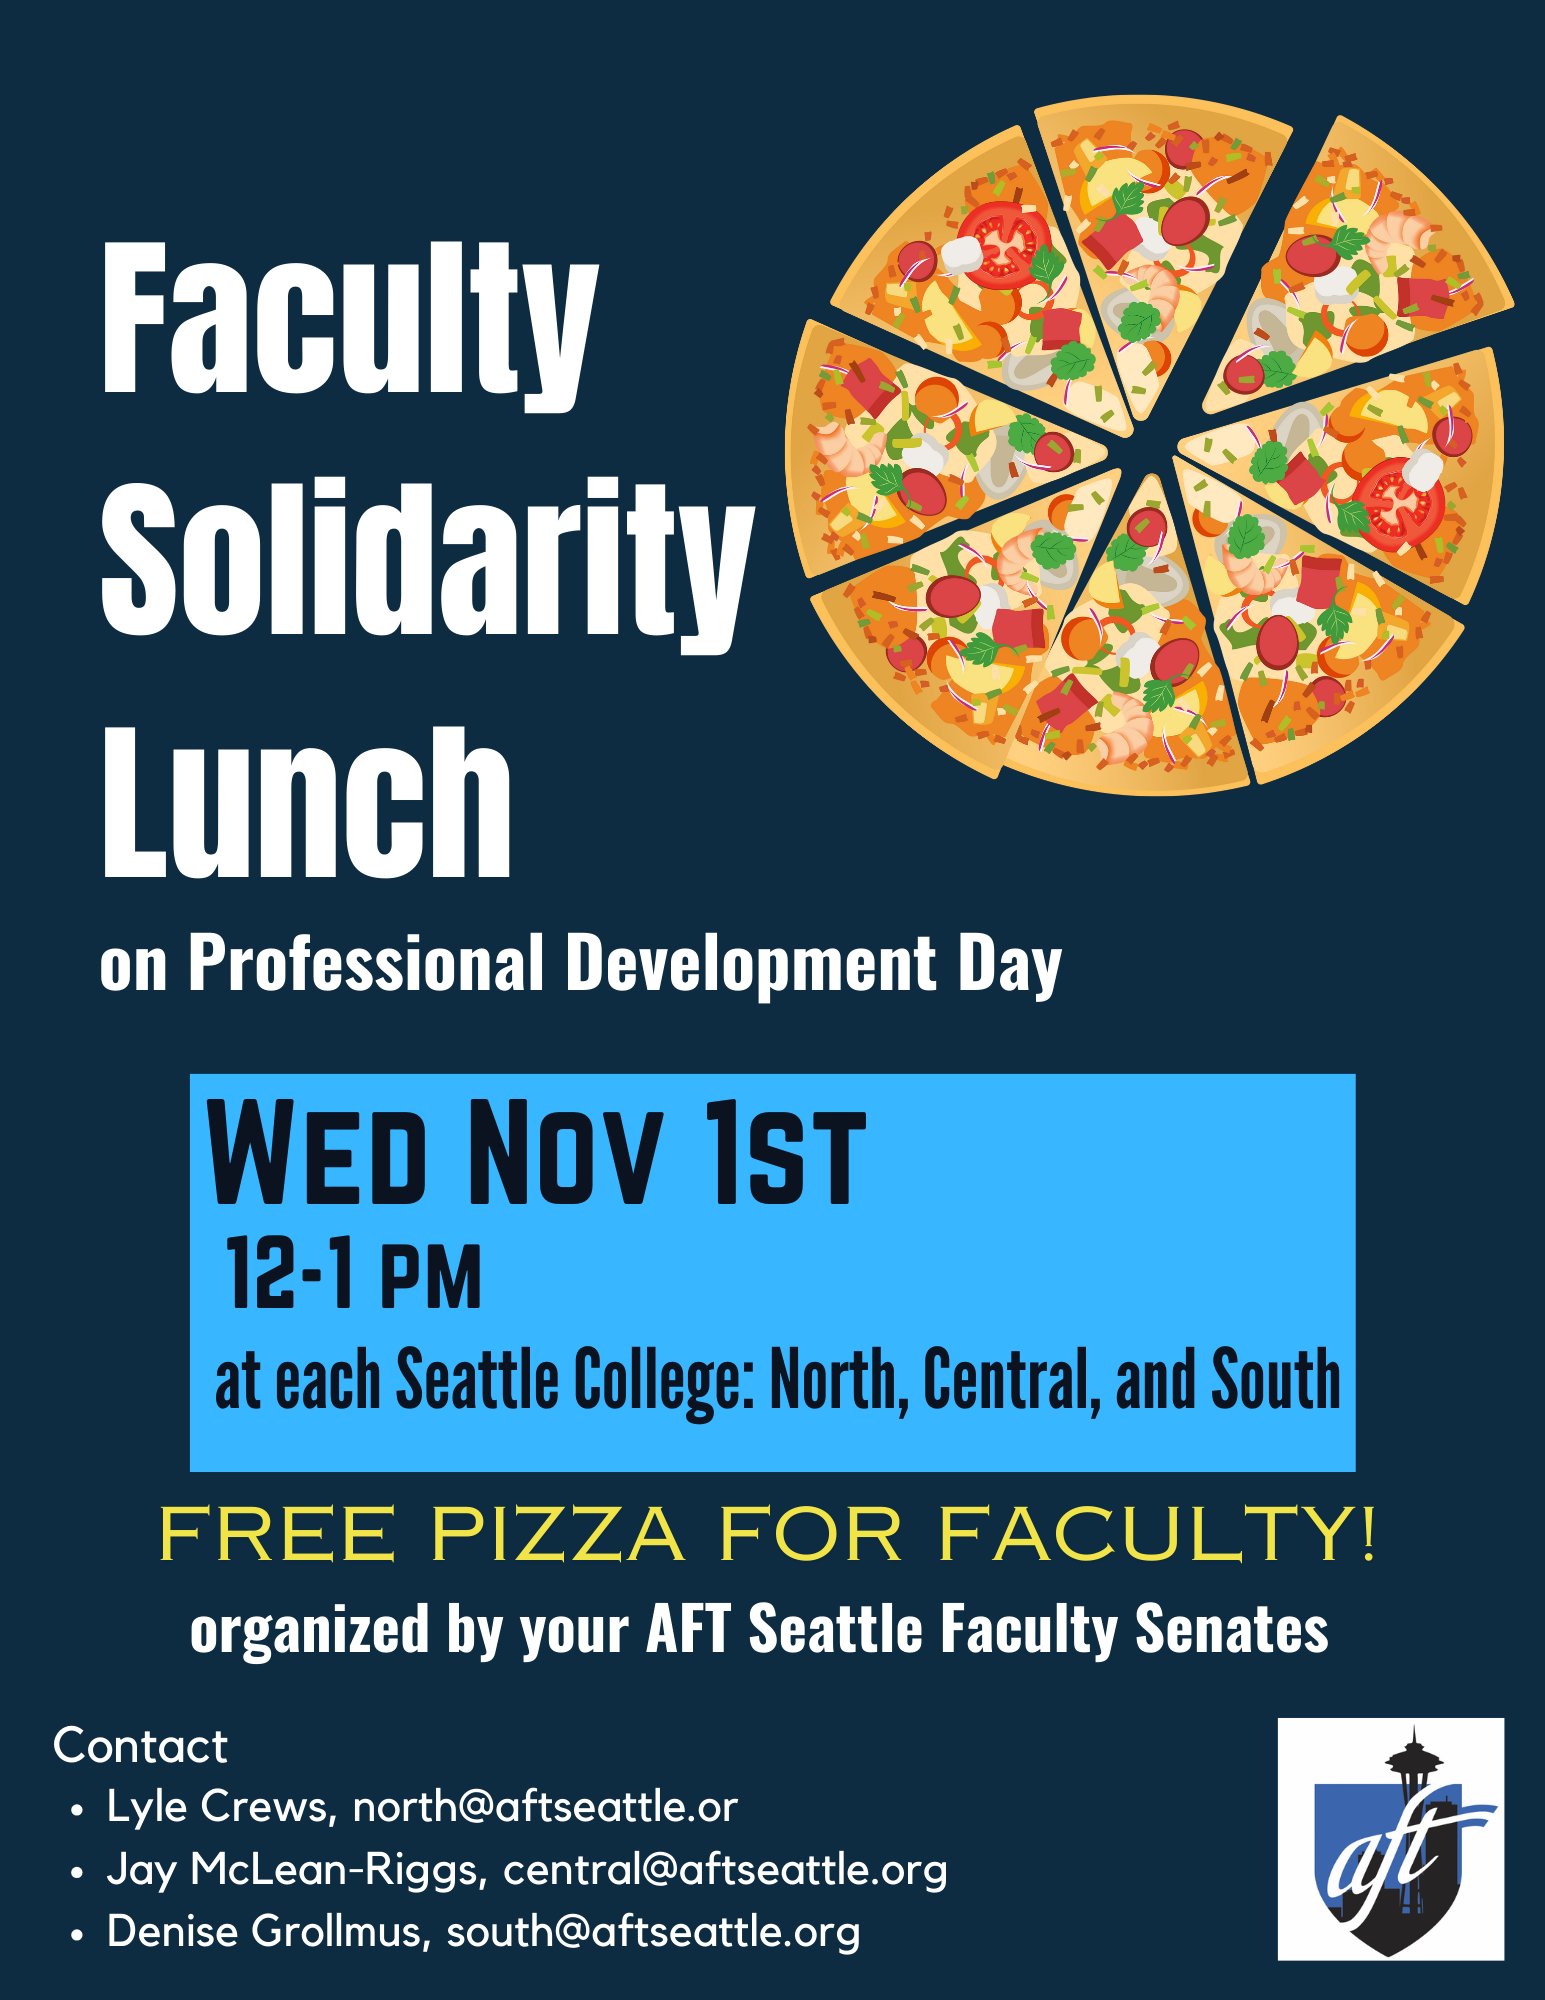 A pizza party for grown-ups! Join faculty colleagues at each of the three Seattle Colleges-- North, Central, and South-- during the lunch hour on Professional Development Day. 